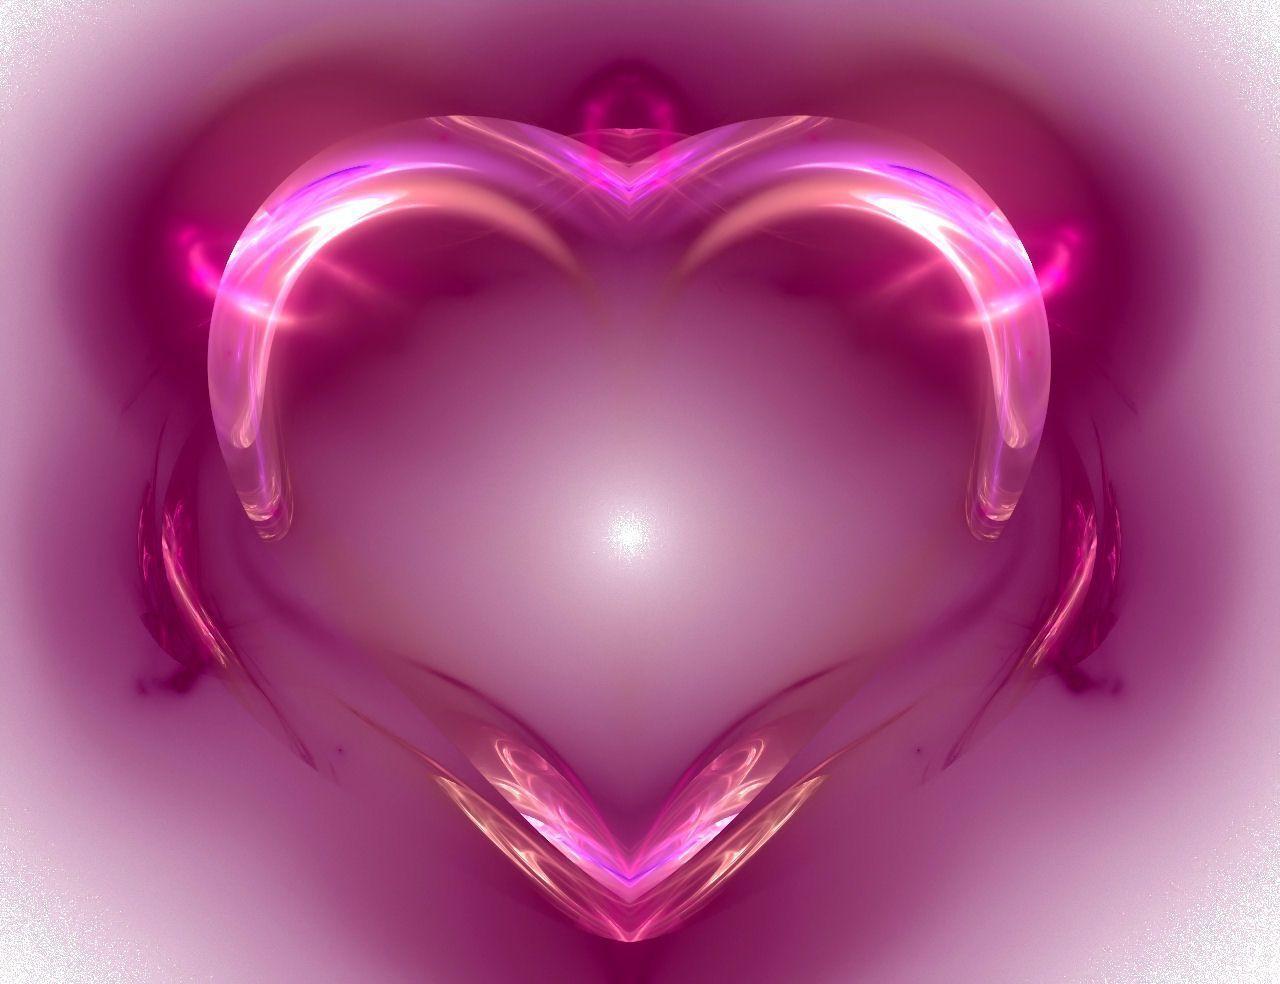 Purple And Pink Hearts Wallpaper. coolstyle wallpaper